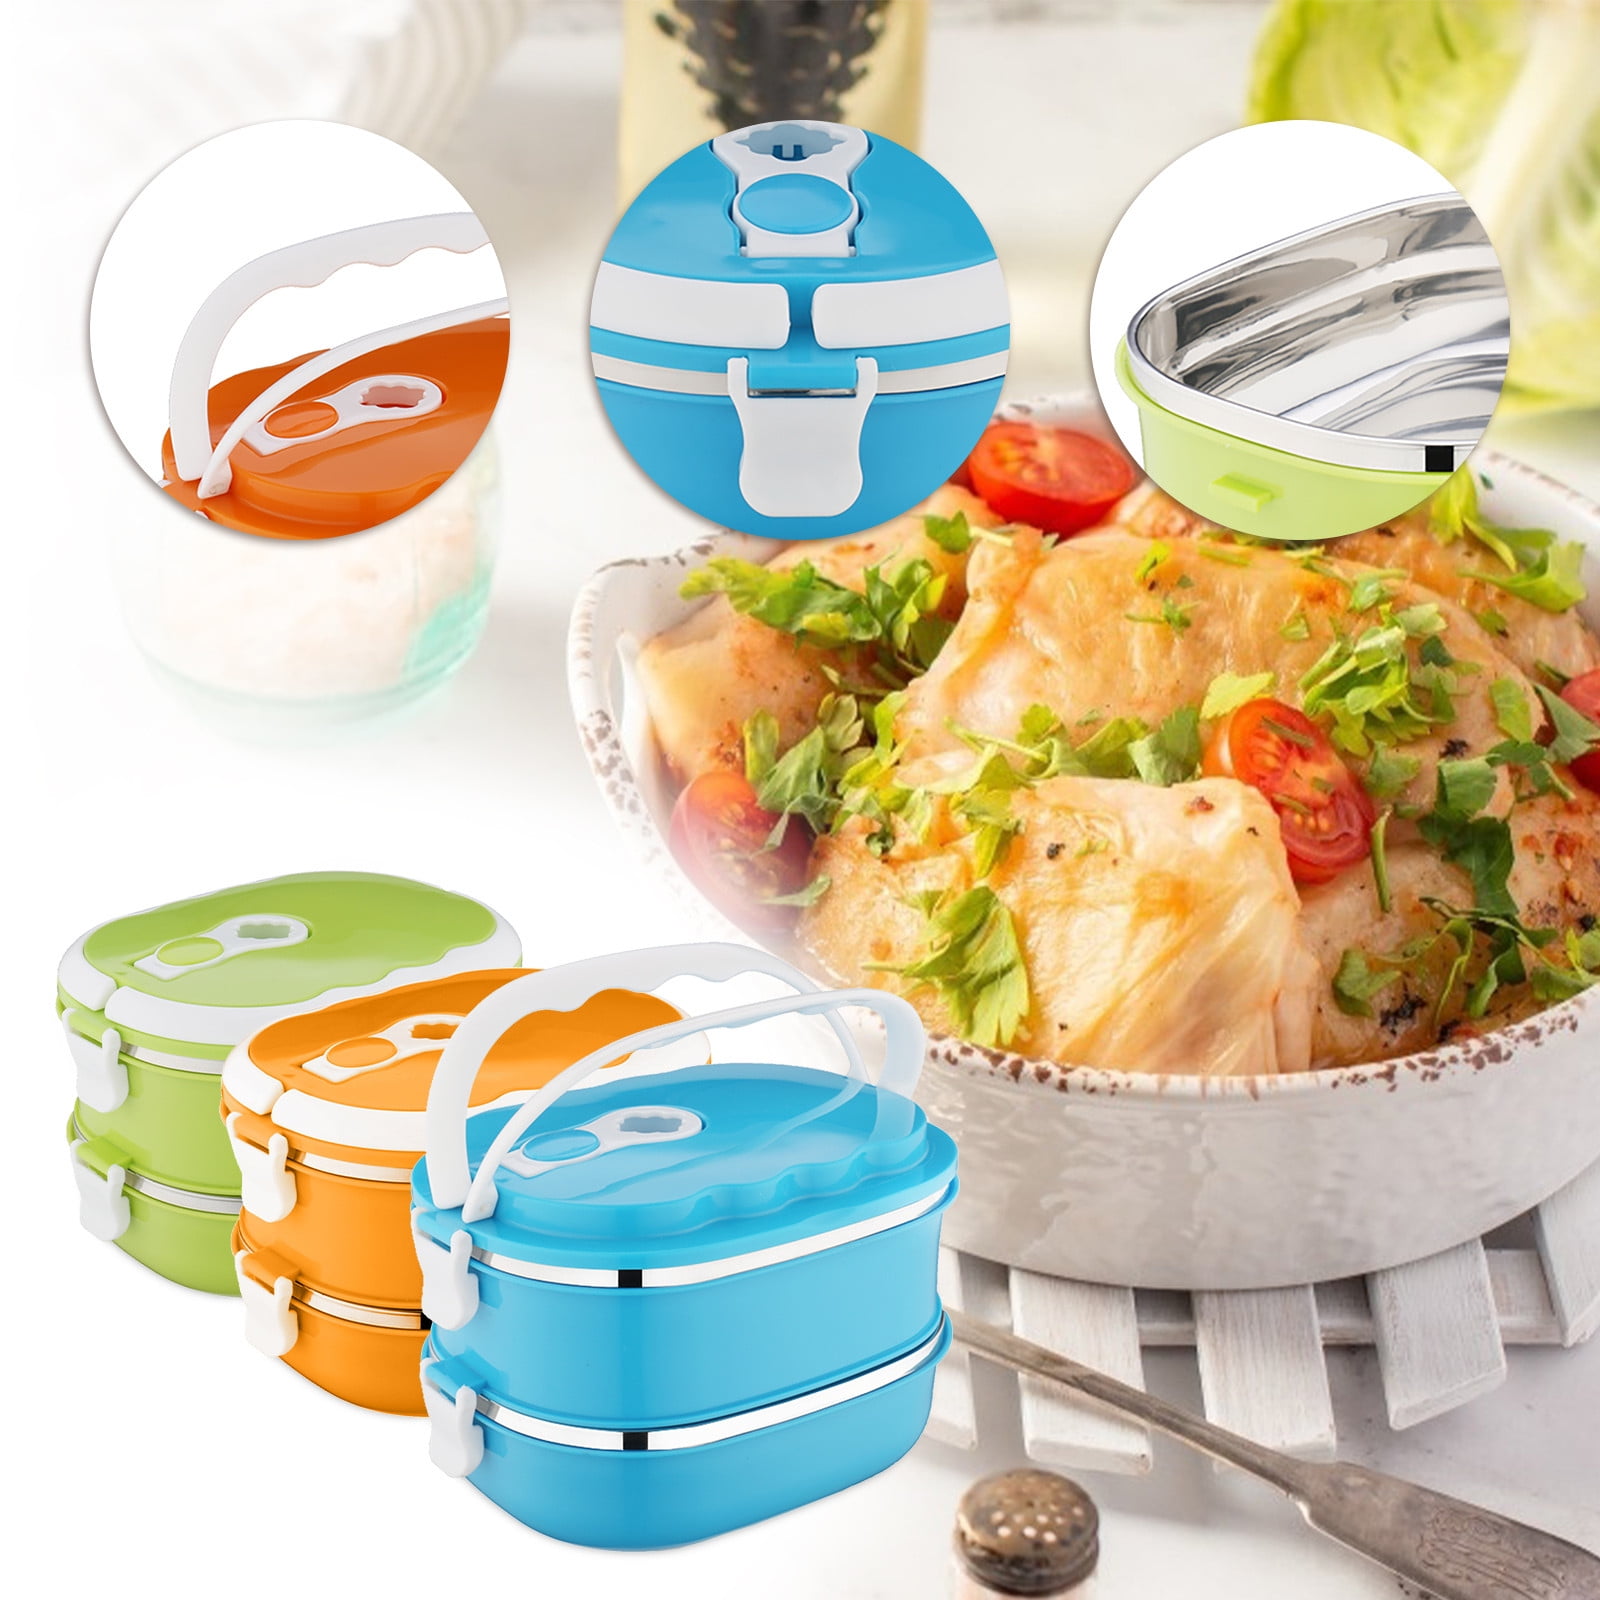 OAVQHLG3B Silicone Bento Box Adult Lunch Box,Leak-Proof,BPA-Free Stacking  Bento Box Lunch Box, (2-Tier) Portable Stackable Food Container Storage  Boxes for Work School Camping 